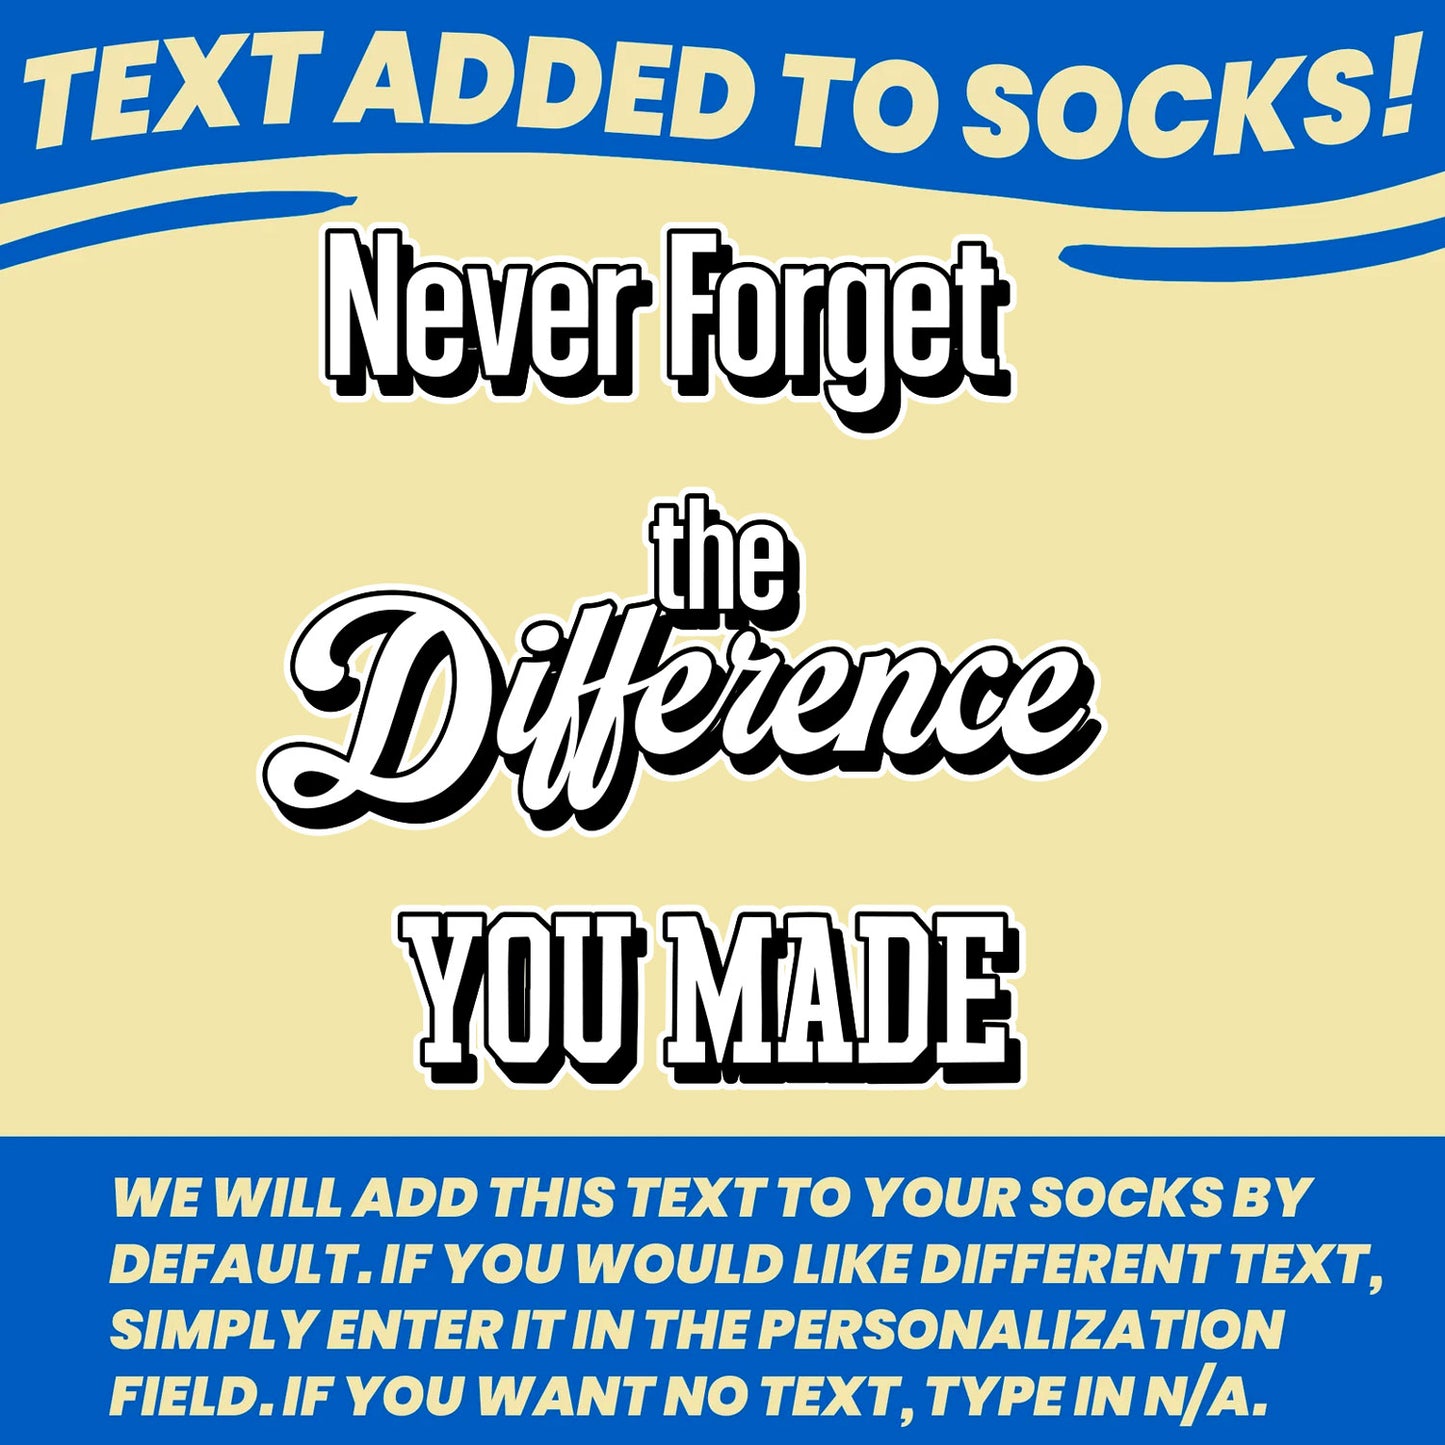 employee anniversary personalized socks with coworkers faces text to be decorated on socks